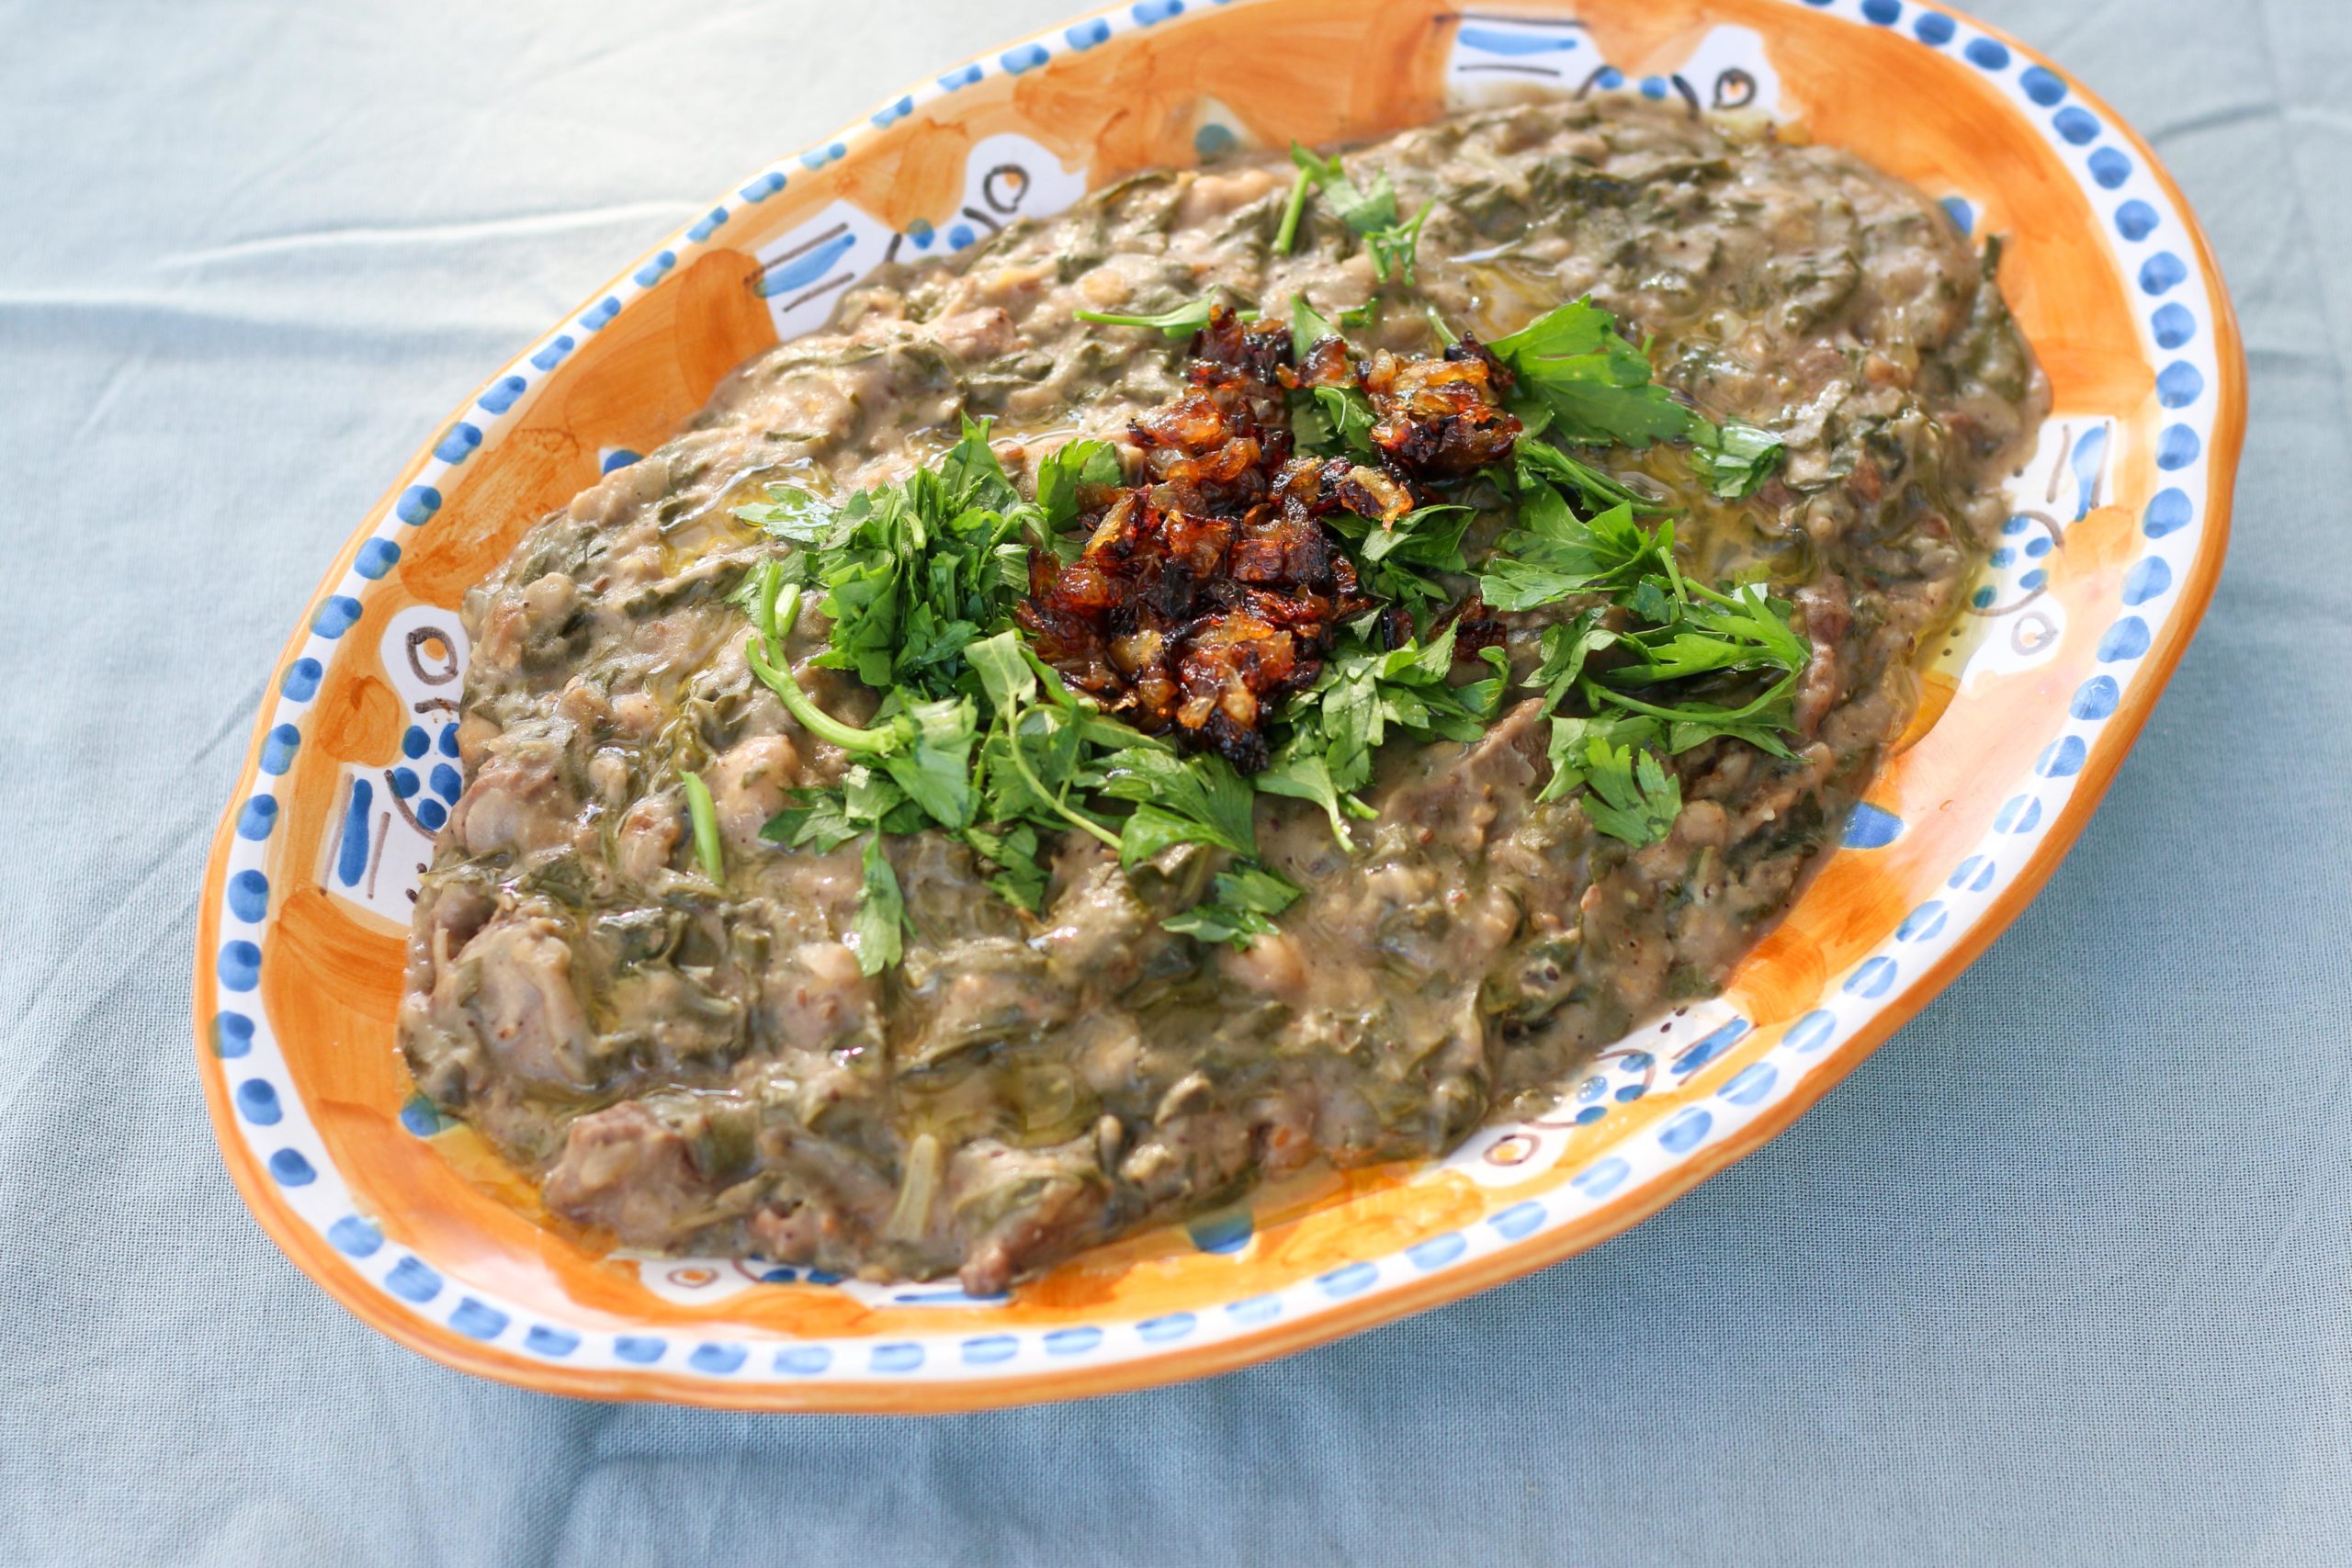 A plate of thick Gazan stew